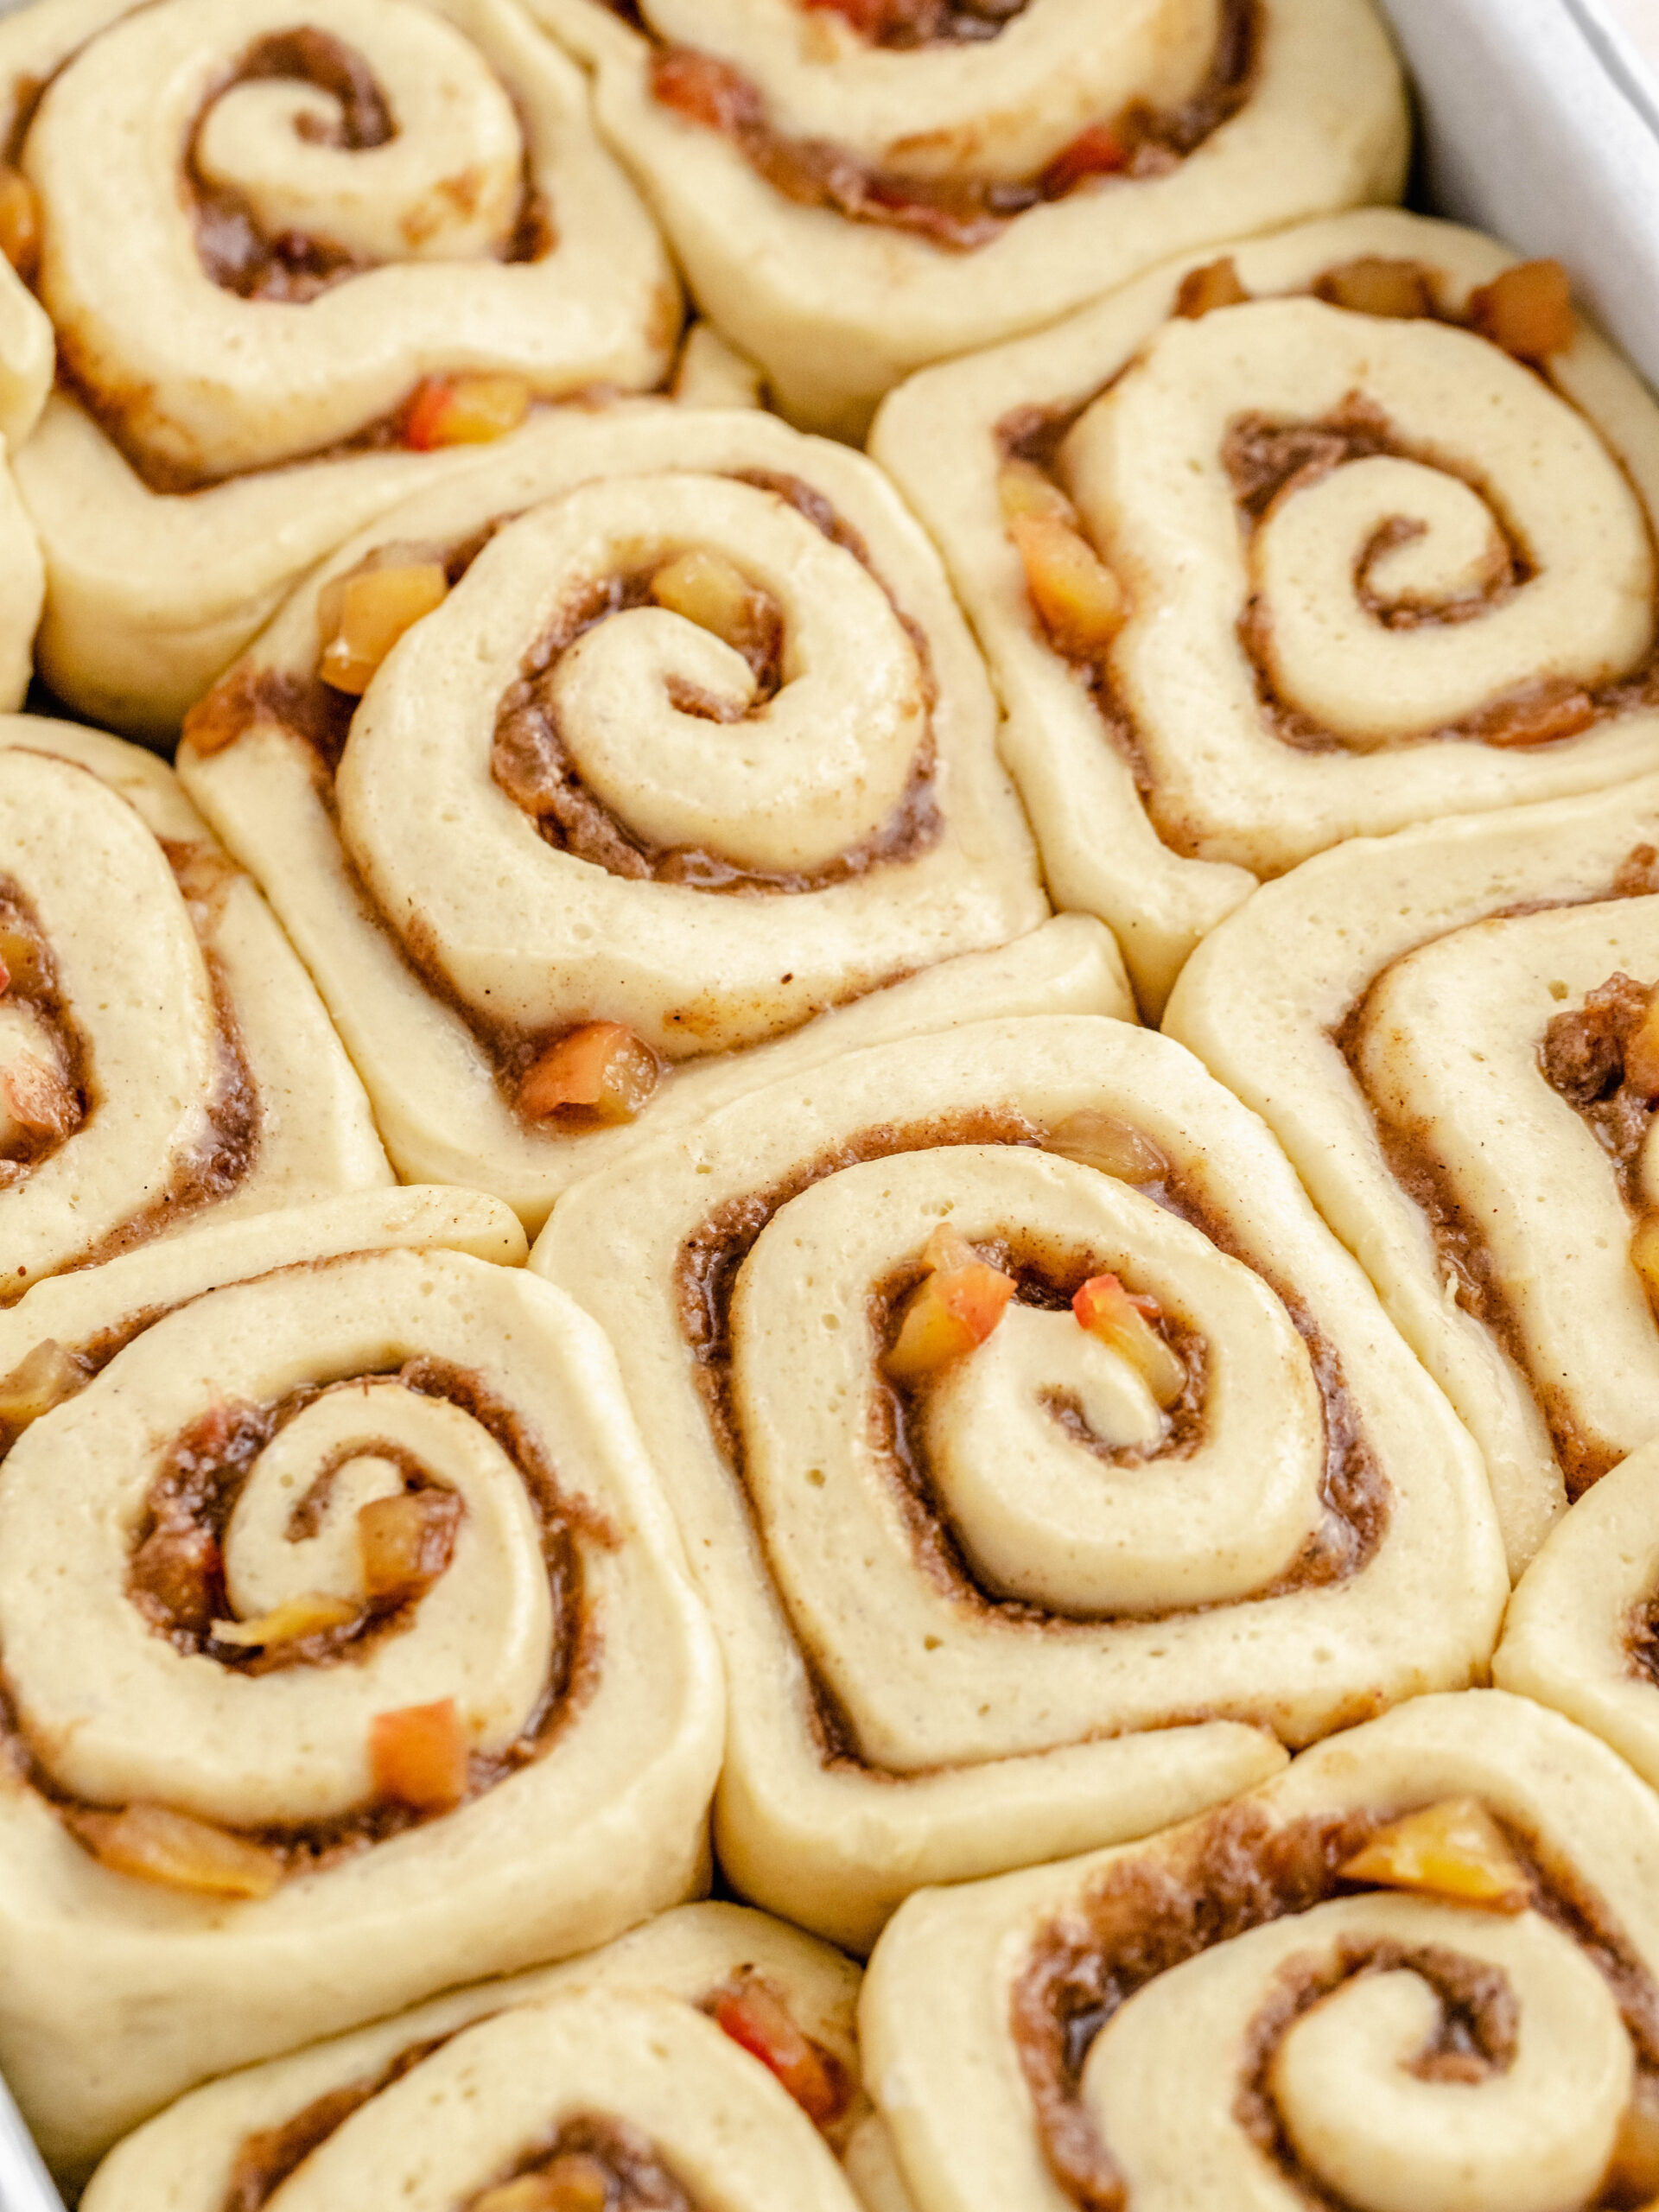 Cinnamon rolls with apple pie filling before they are baked.